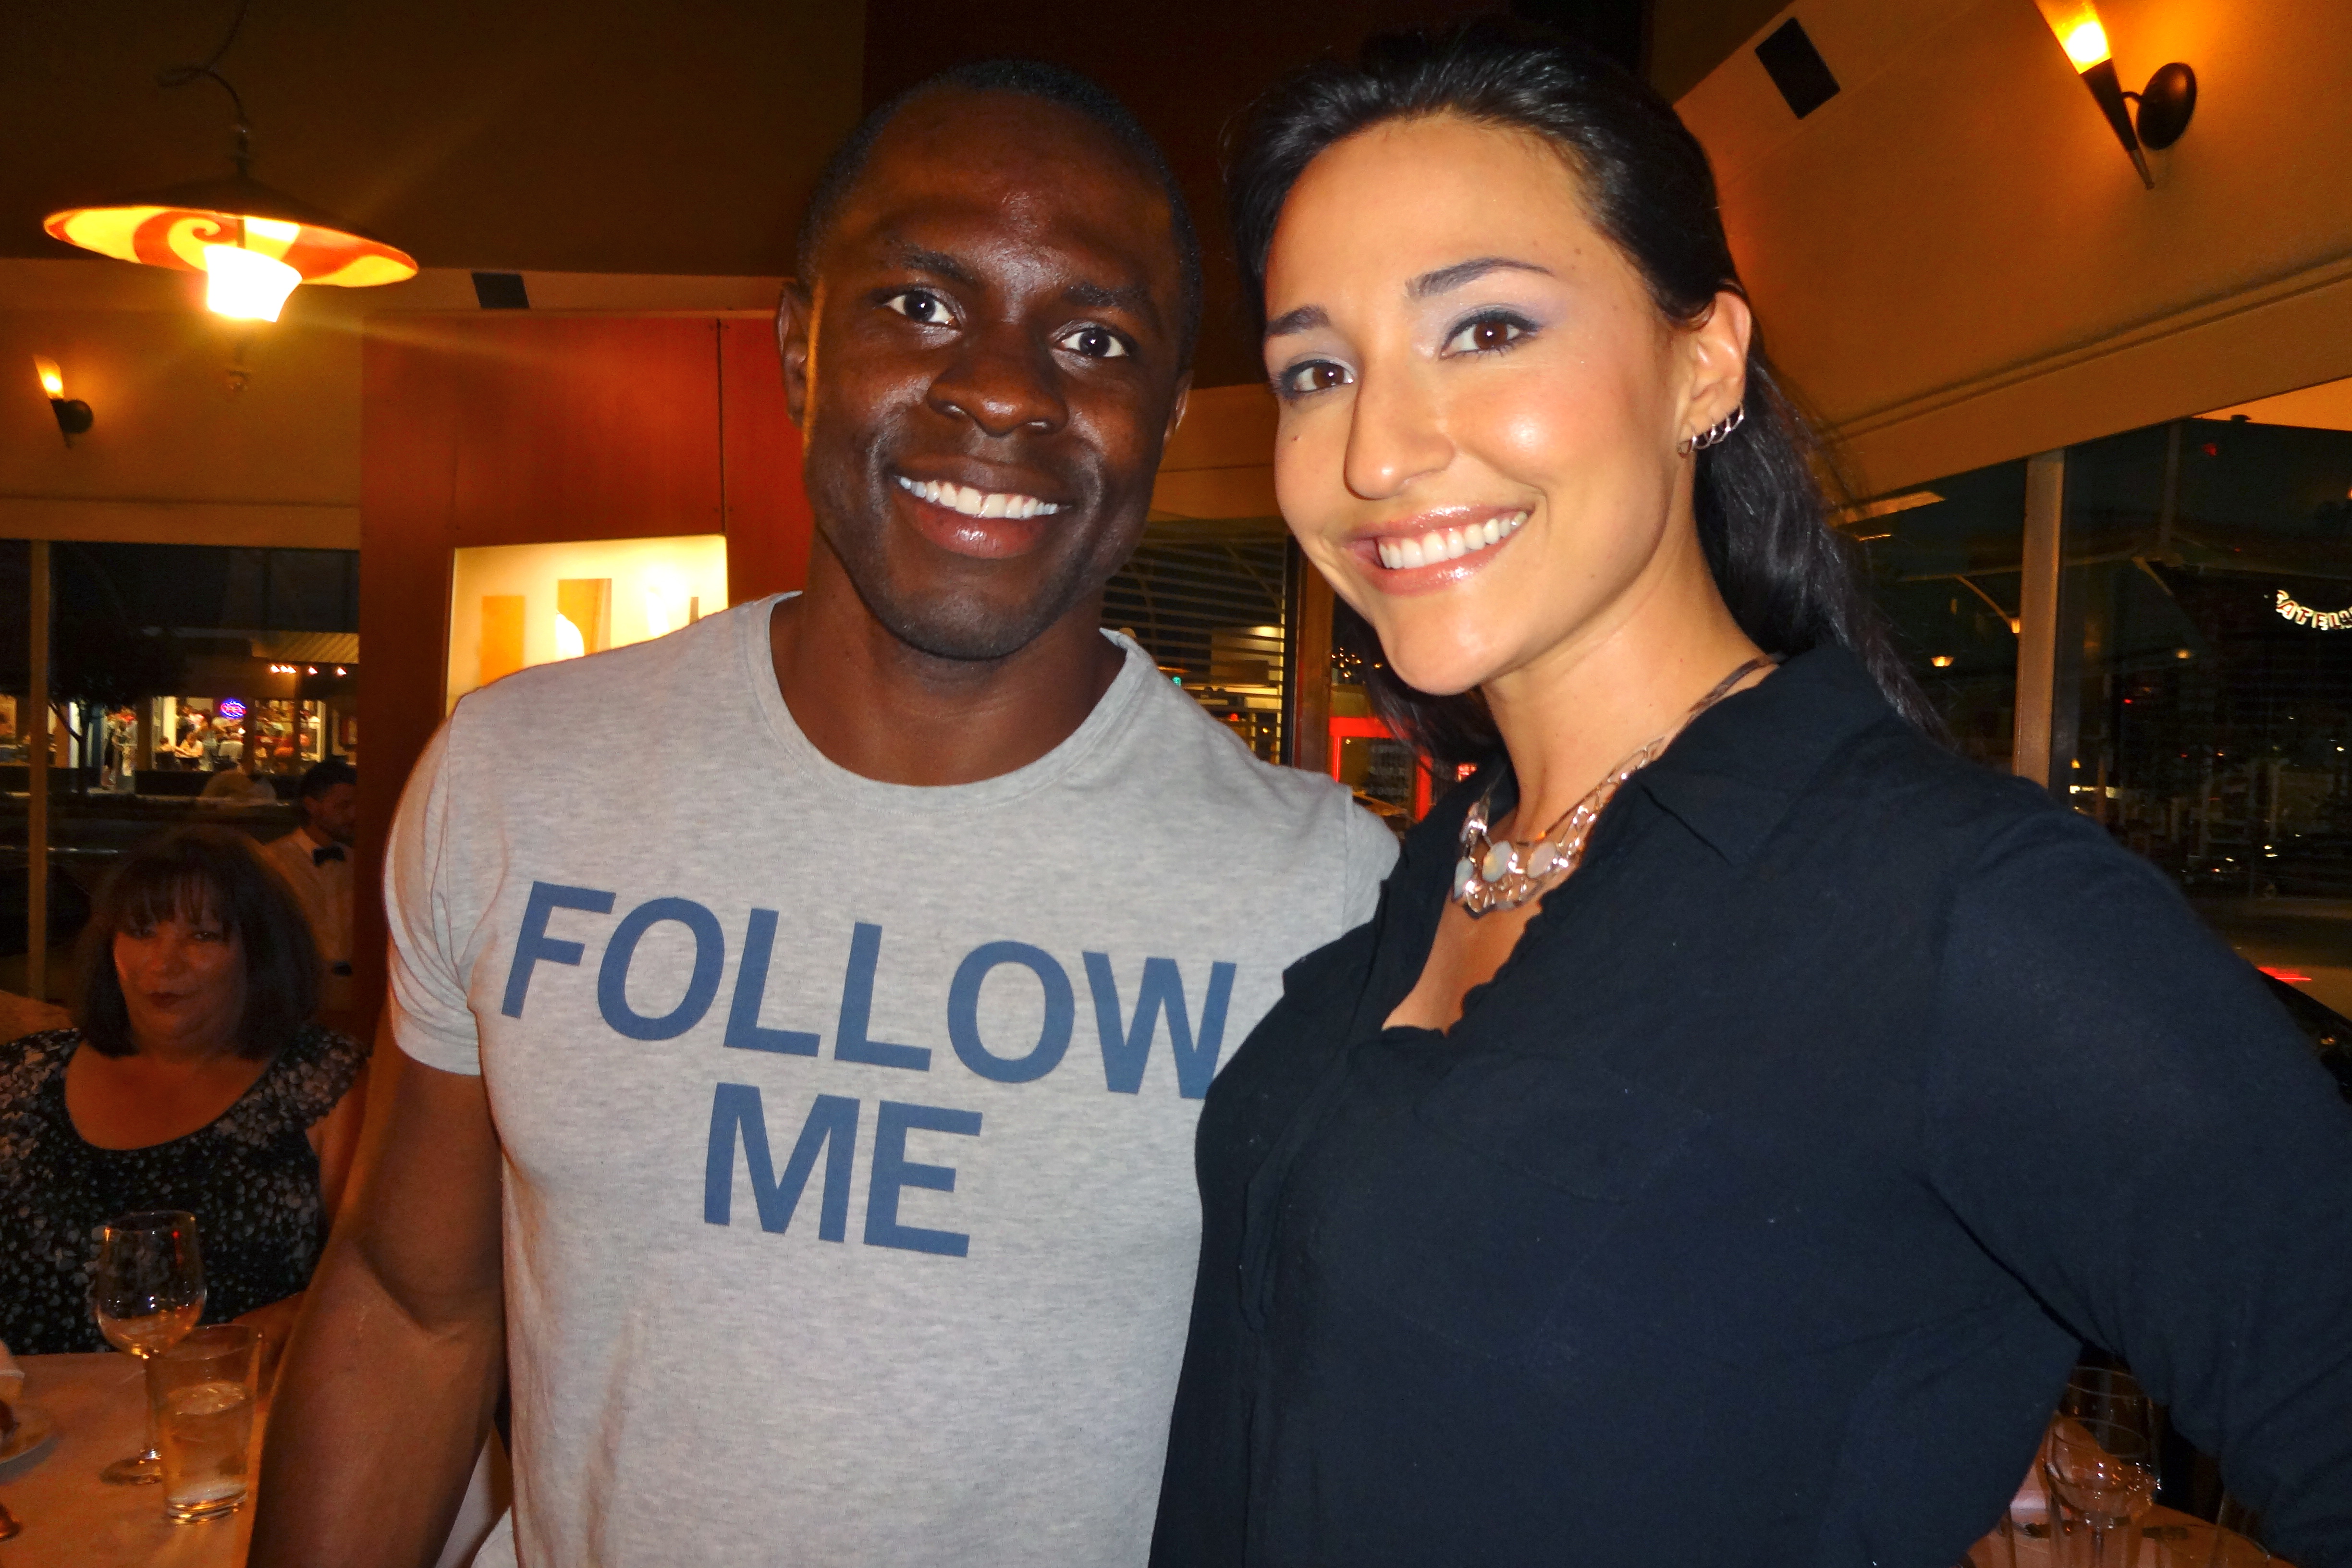 Independence Day: Resurgence Wrap Party with Gbenga Akinnagbe